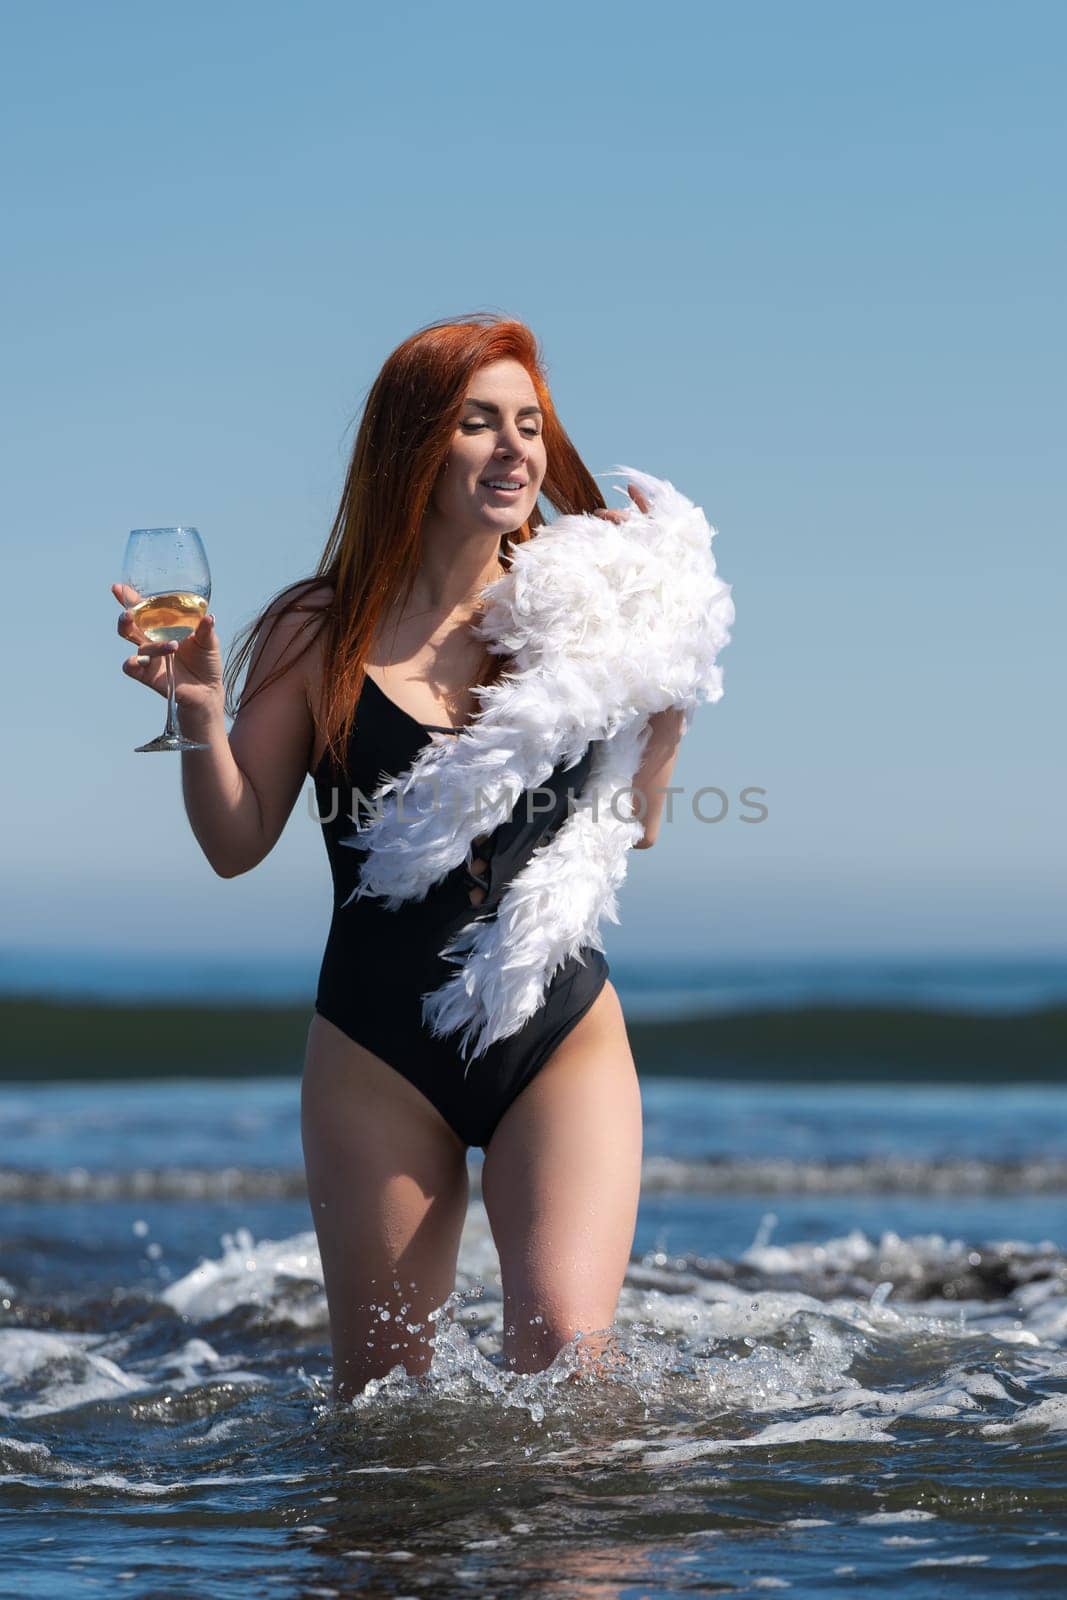 Woman exuding sensuality walks knee deep in waves of ocean, holding wine glass and boa in her hands by Alexander-Piragis